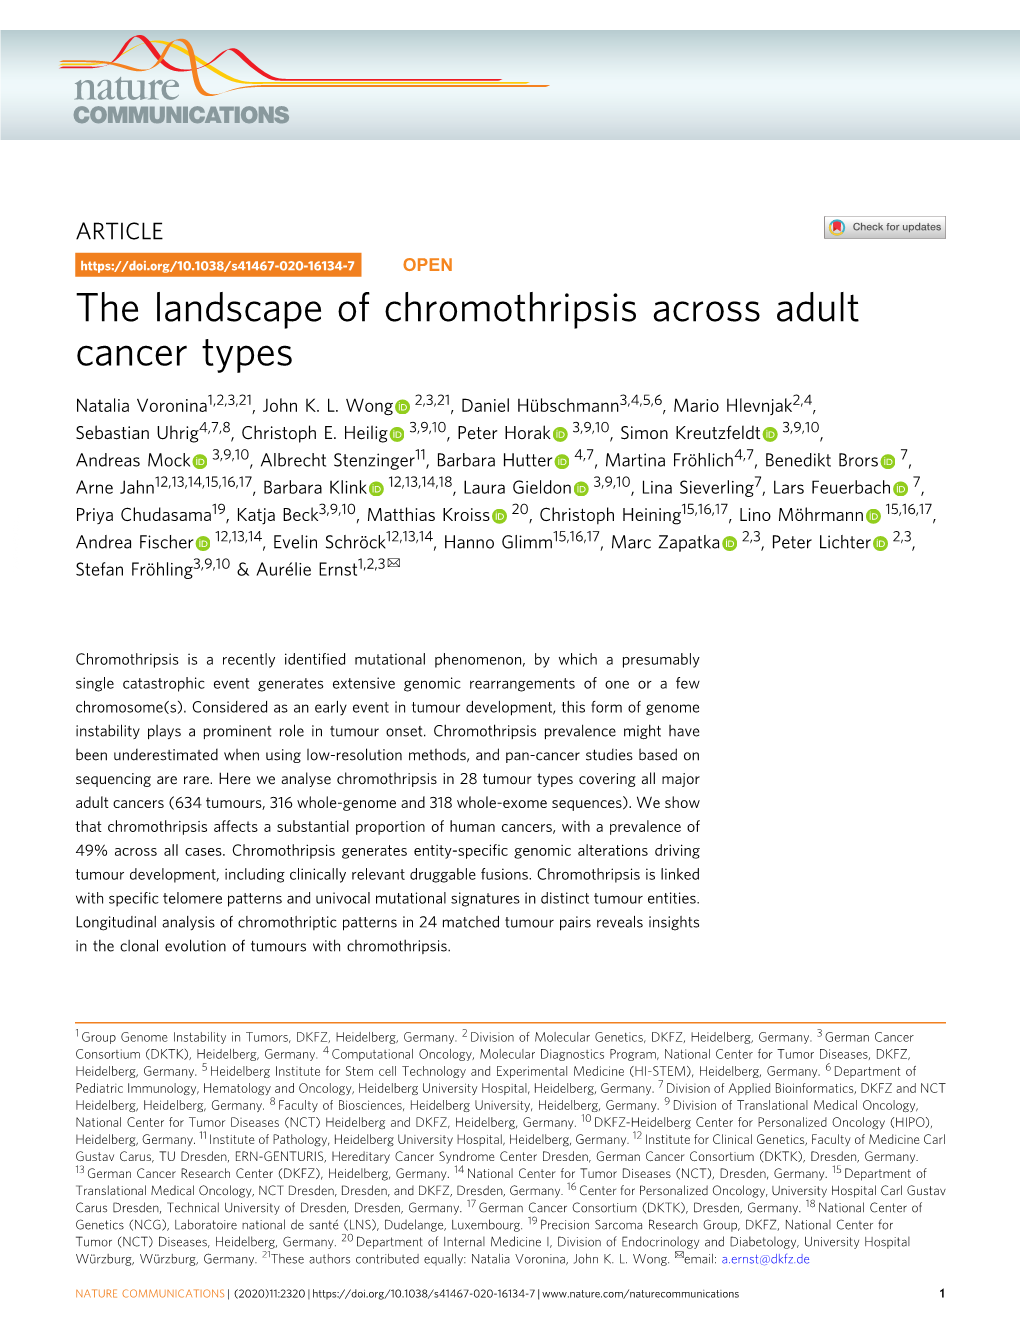 The Landscape of Chromothripsis Across Adult Cancer Types